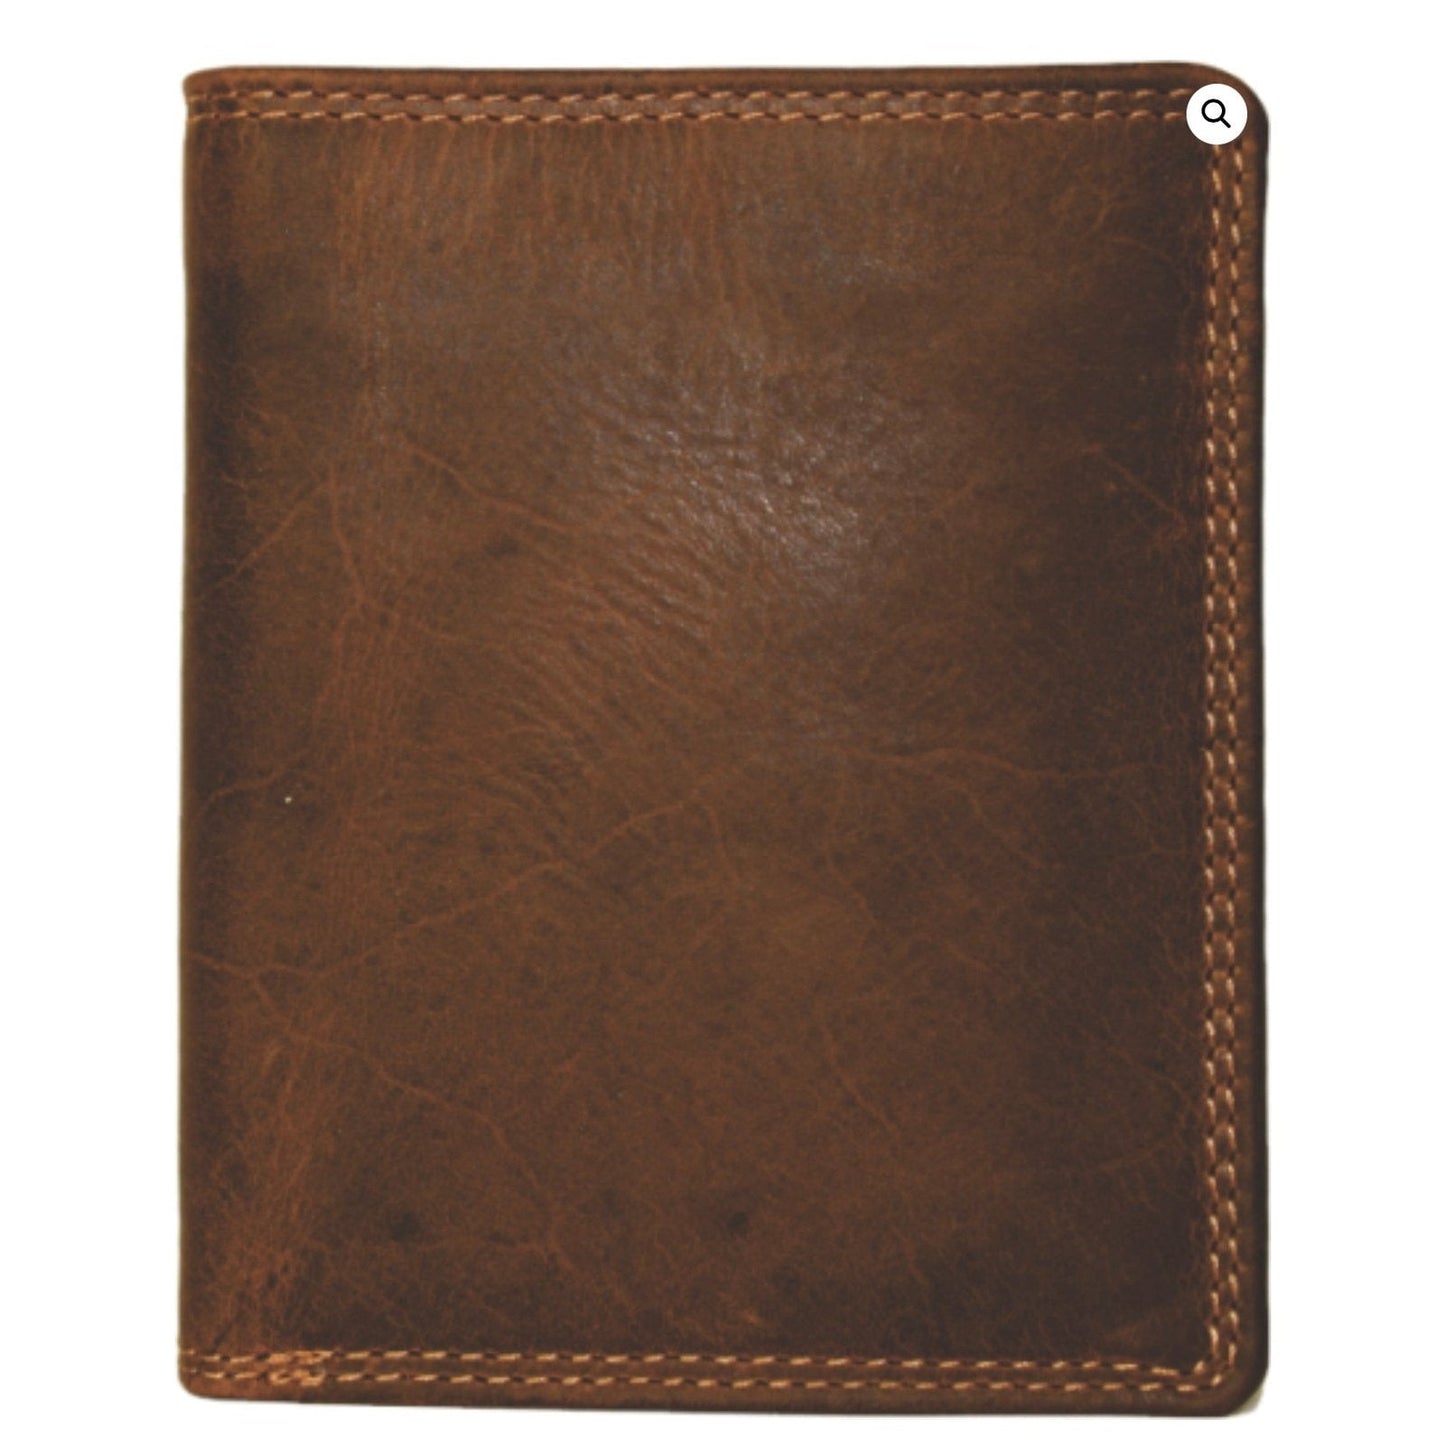 Rugged Earth Mens Leather Wallet with Coin Pocket Brown 990005